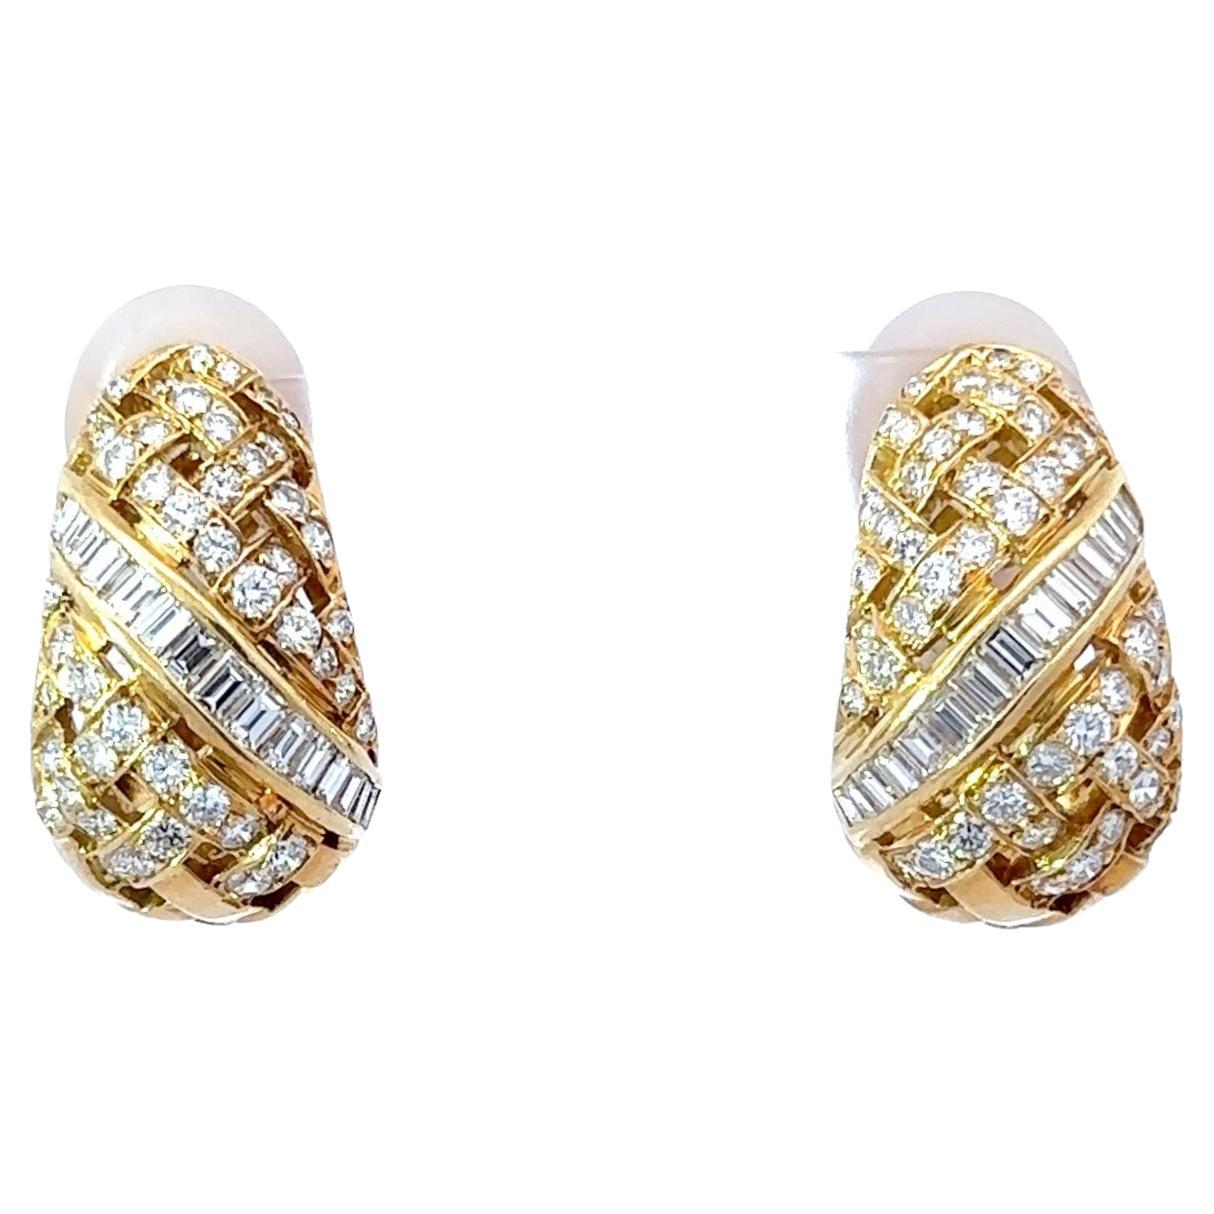 Tiffany and Co. Gold and Diamond Earrings